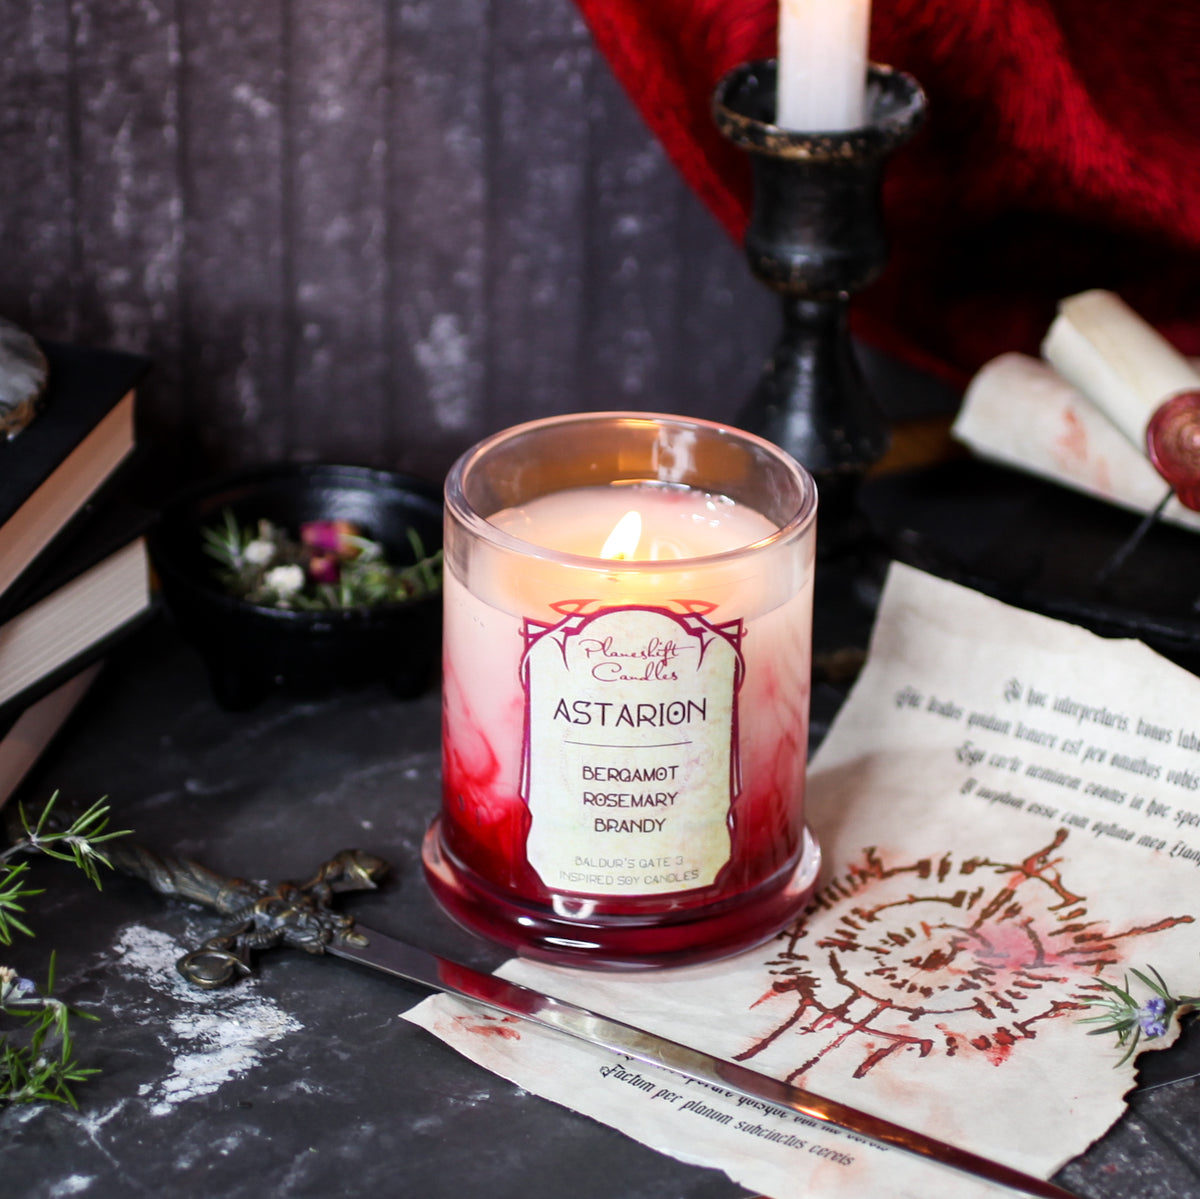 Picture of a white soy wax candle with blood red swirls running through it. The label reads "Astarion - Bergamot, Rosemary, Brandy. Baldur's Gate 3 Inspired Soy Candle - Planeshift Candles."